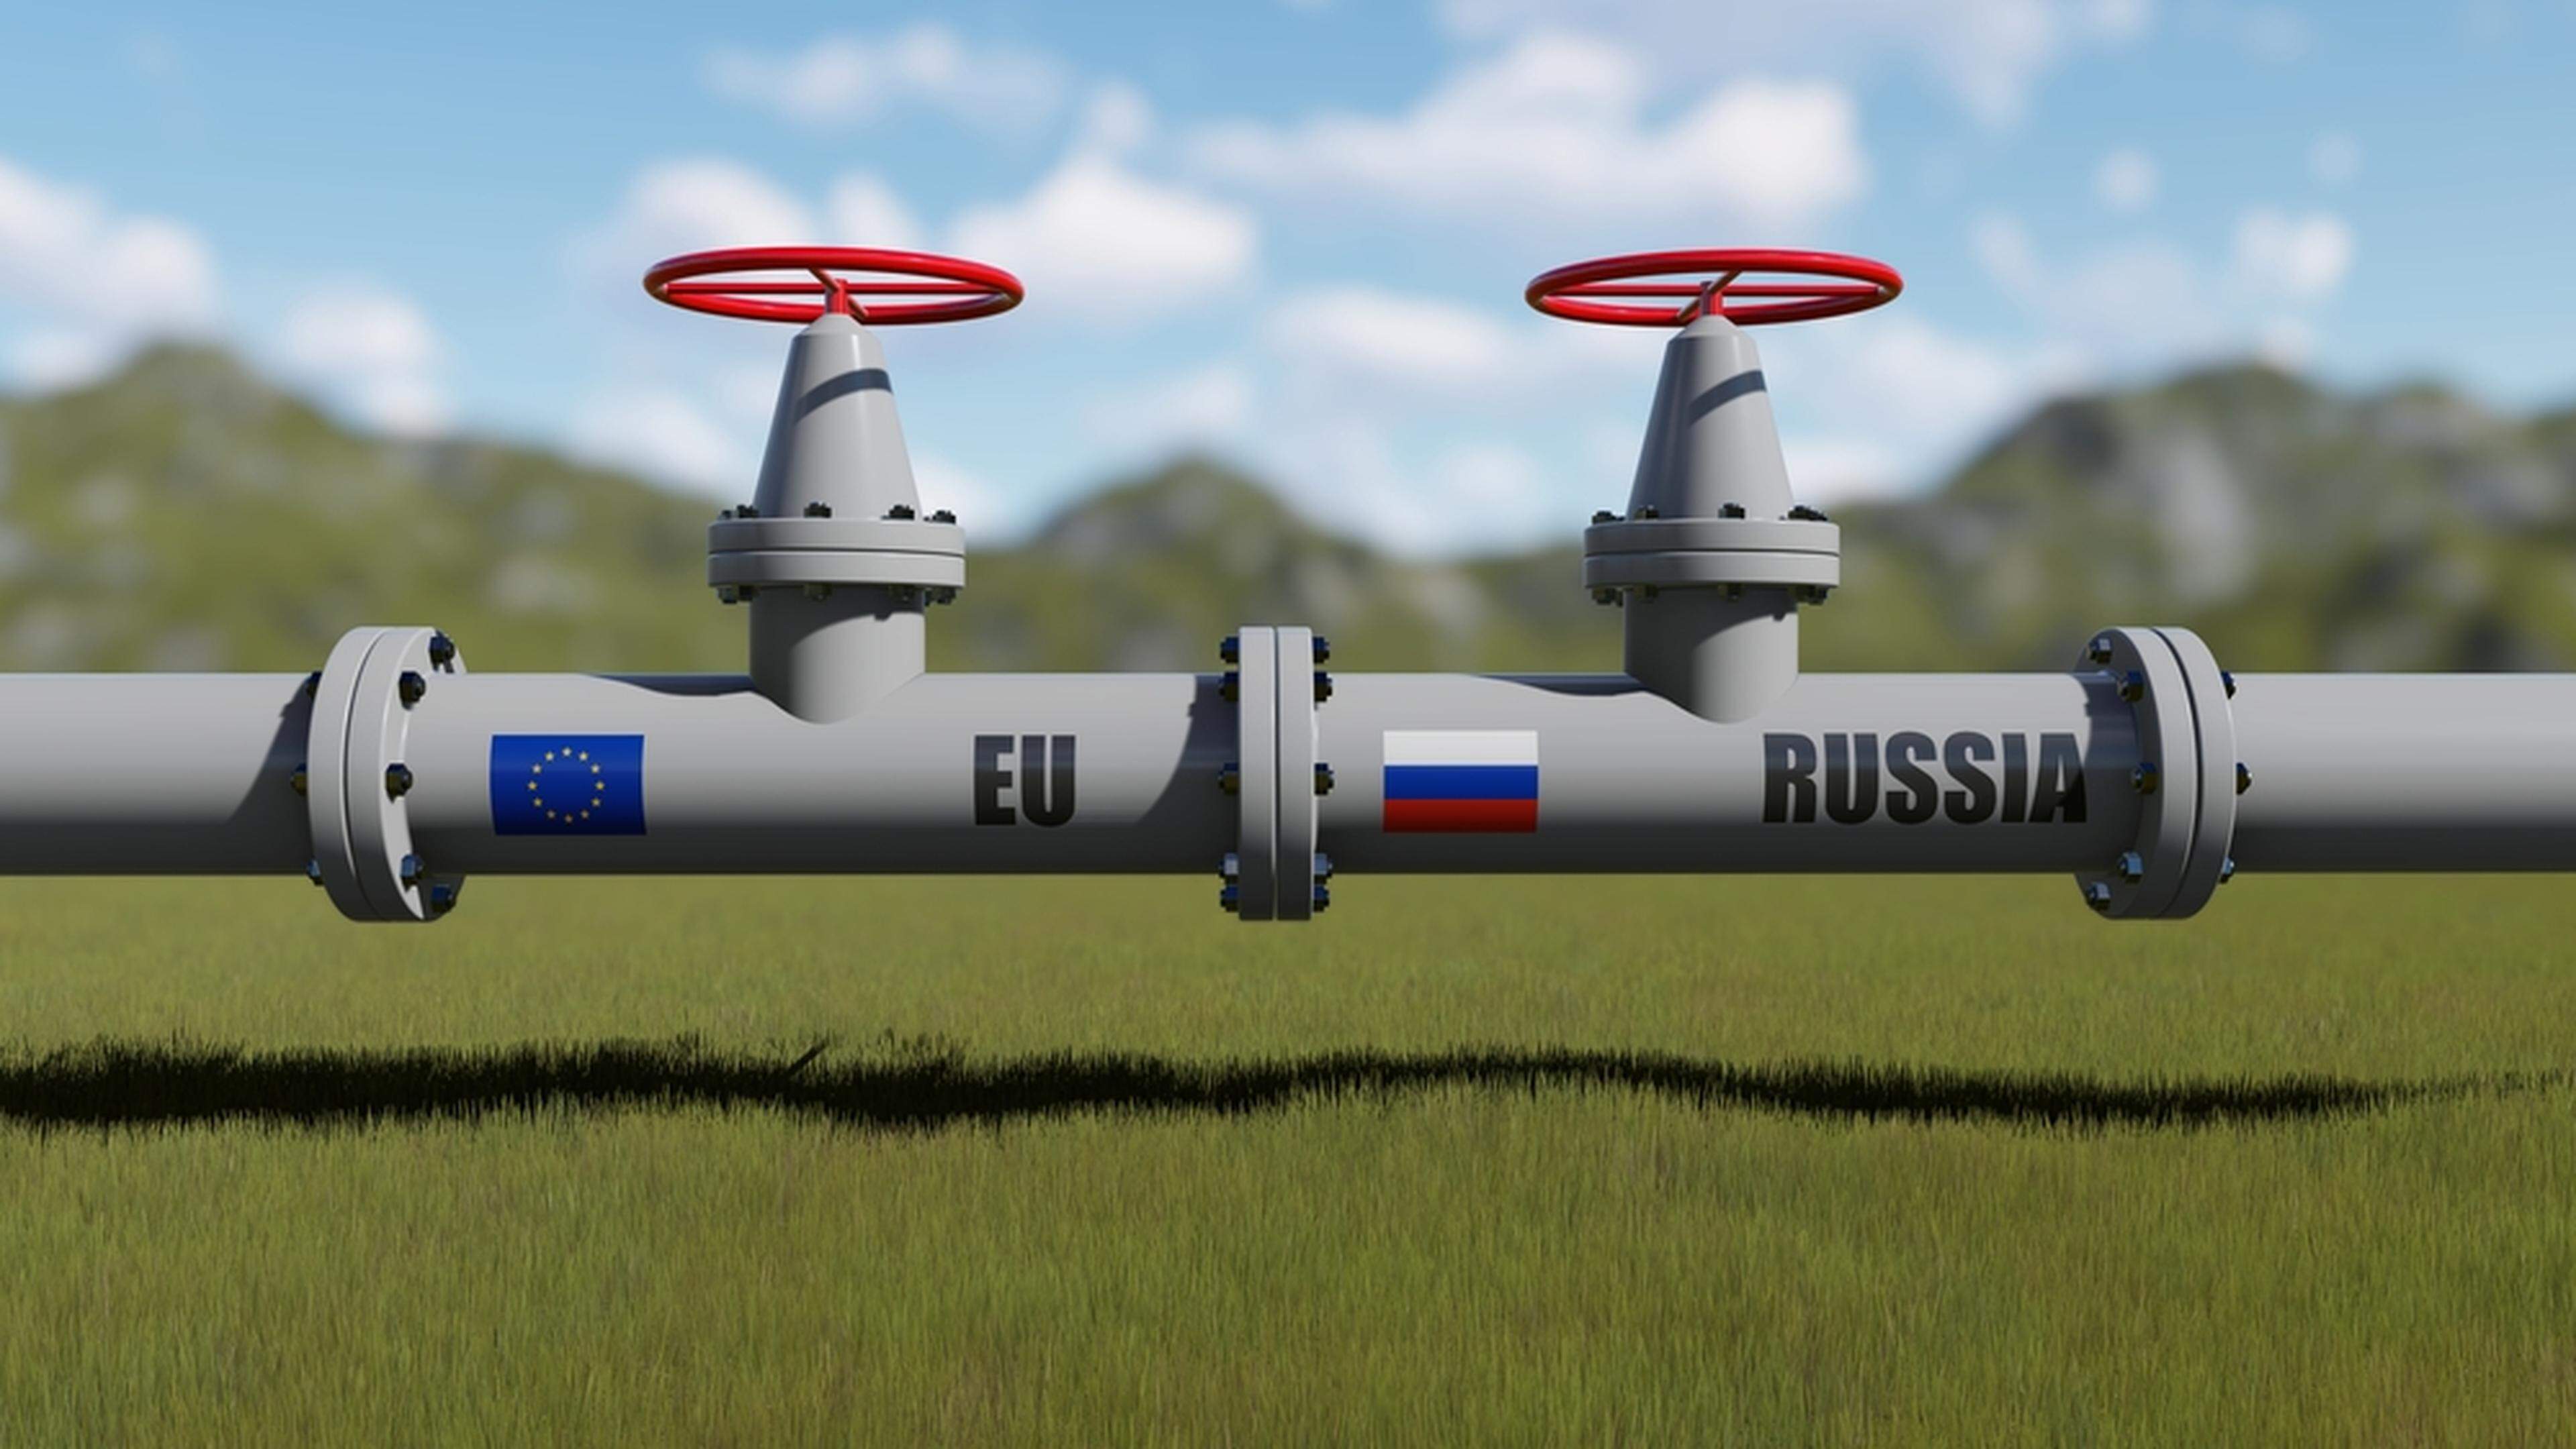 A gas pipeline with flags of Russia and the EU